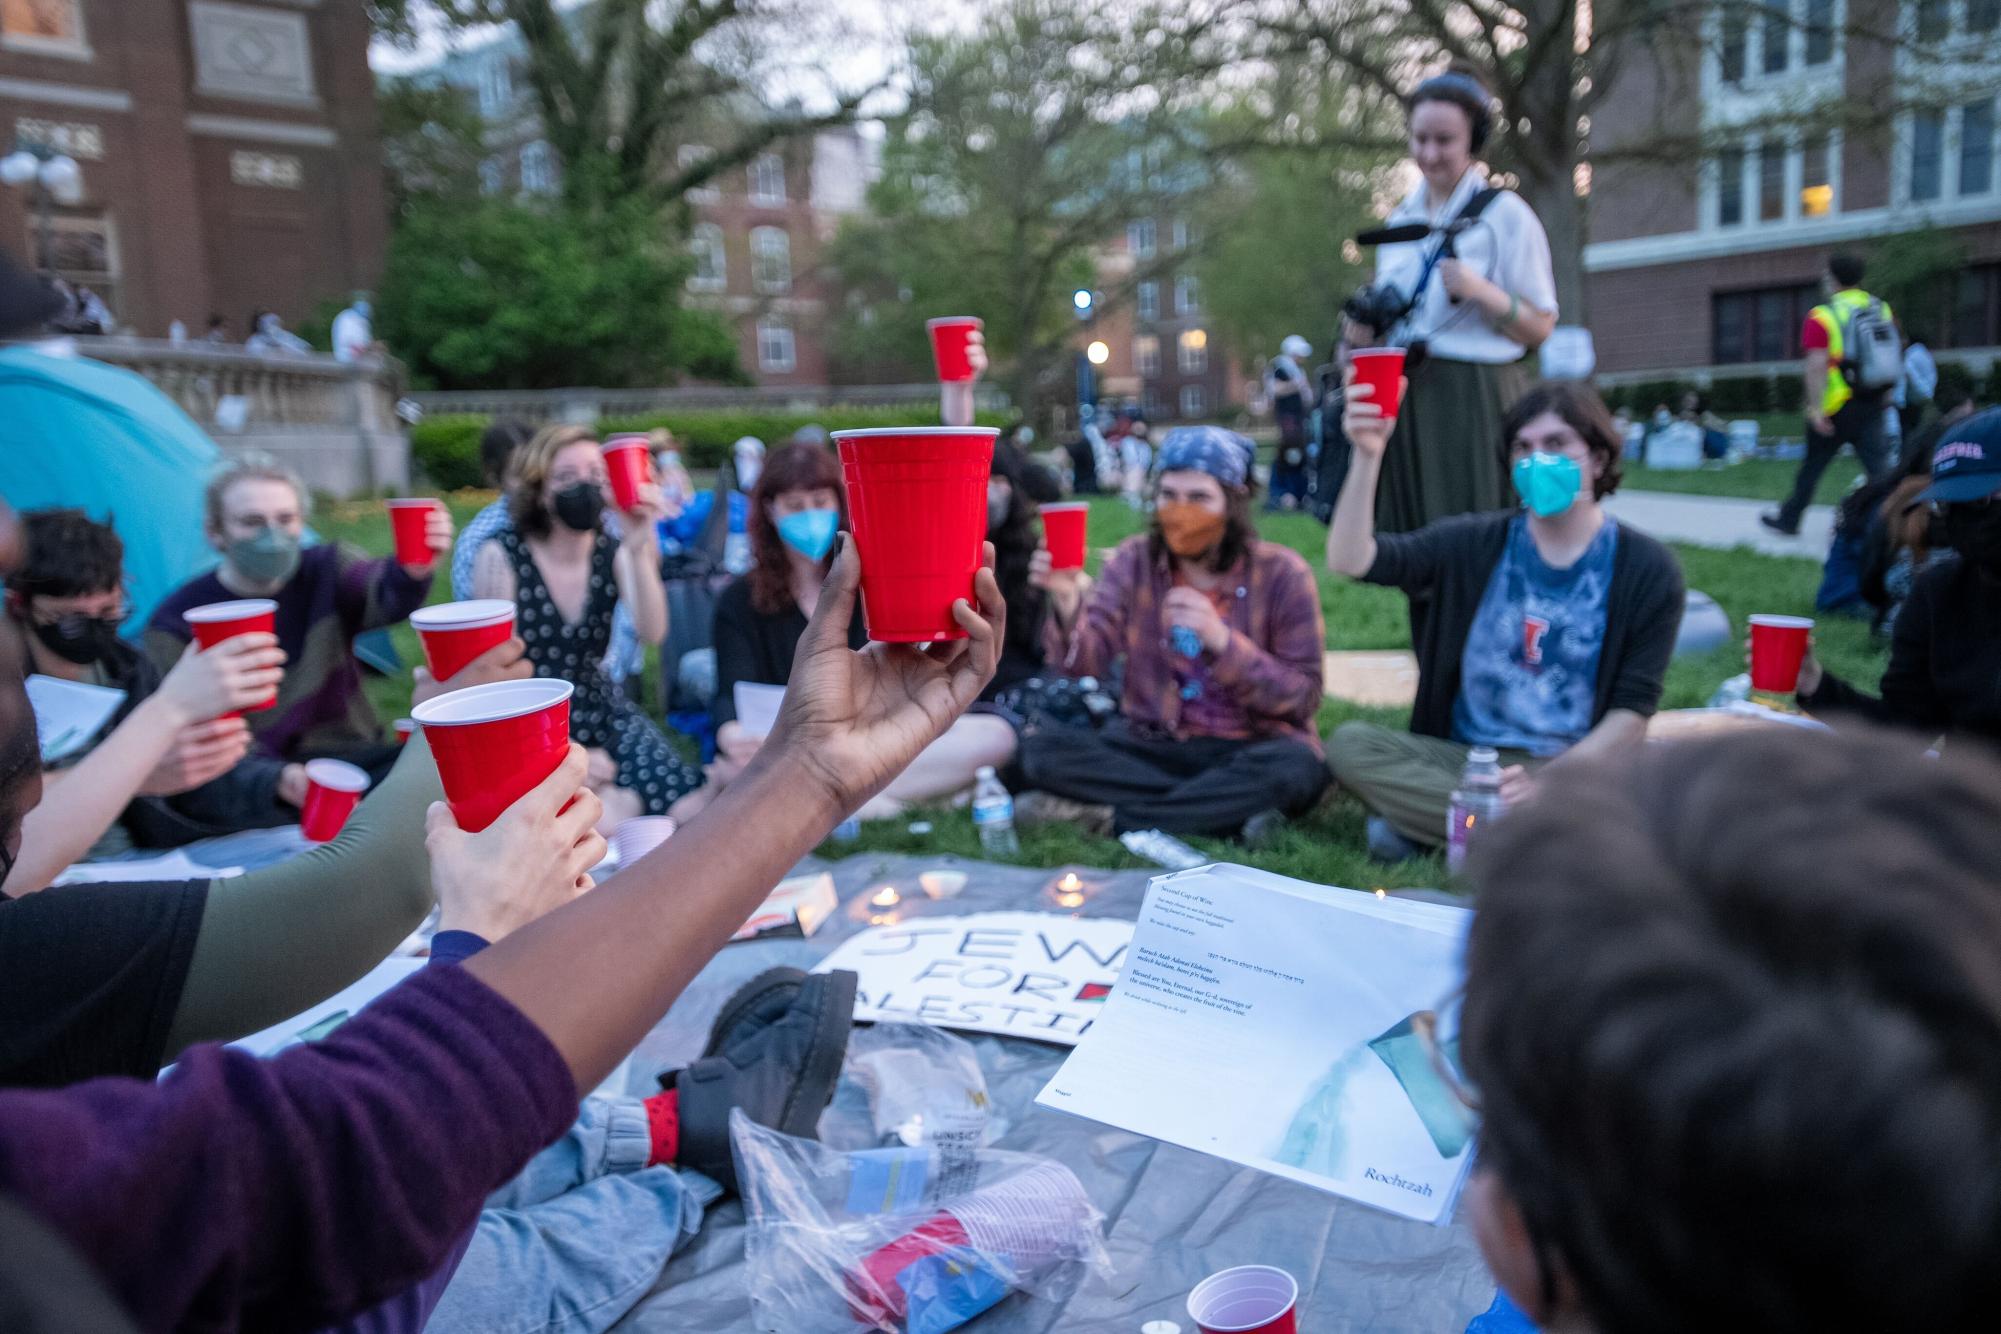 Jewish protesters hold a passover seder in the middle of the encampment zone on the Main Quad.